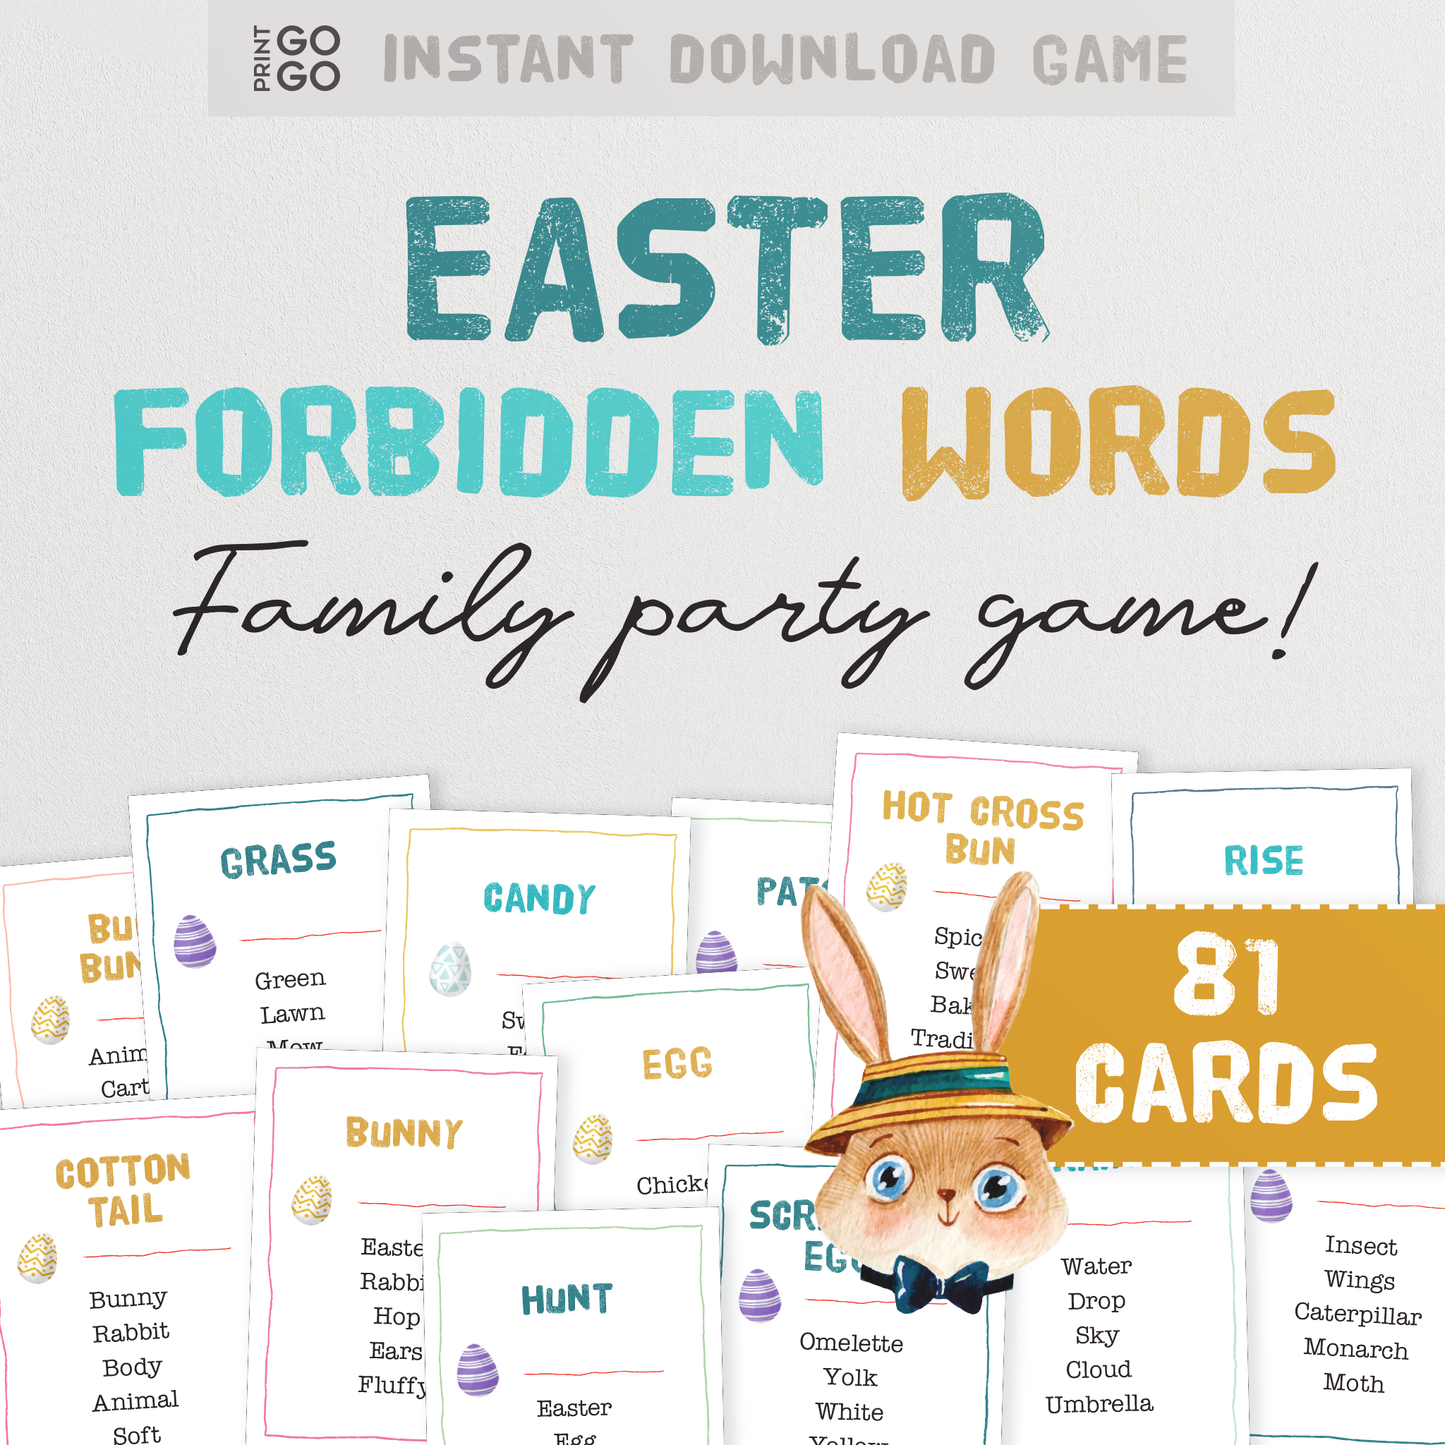 Easter Forbidden Words - The Hilarious Family Party Game of Giving Careful Clues